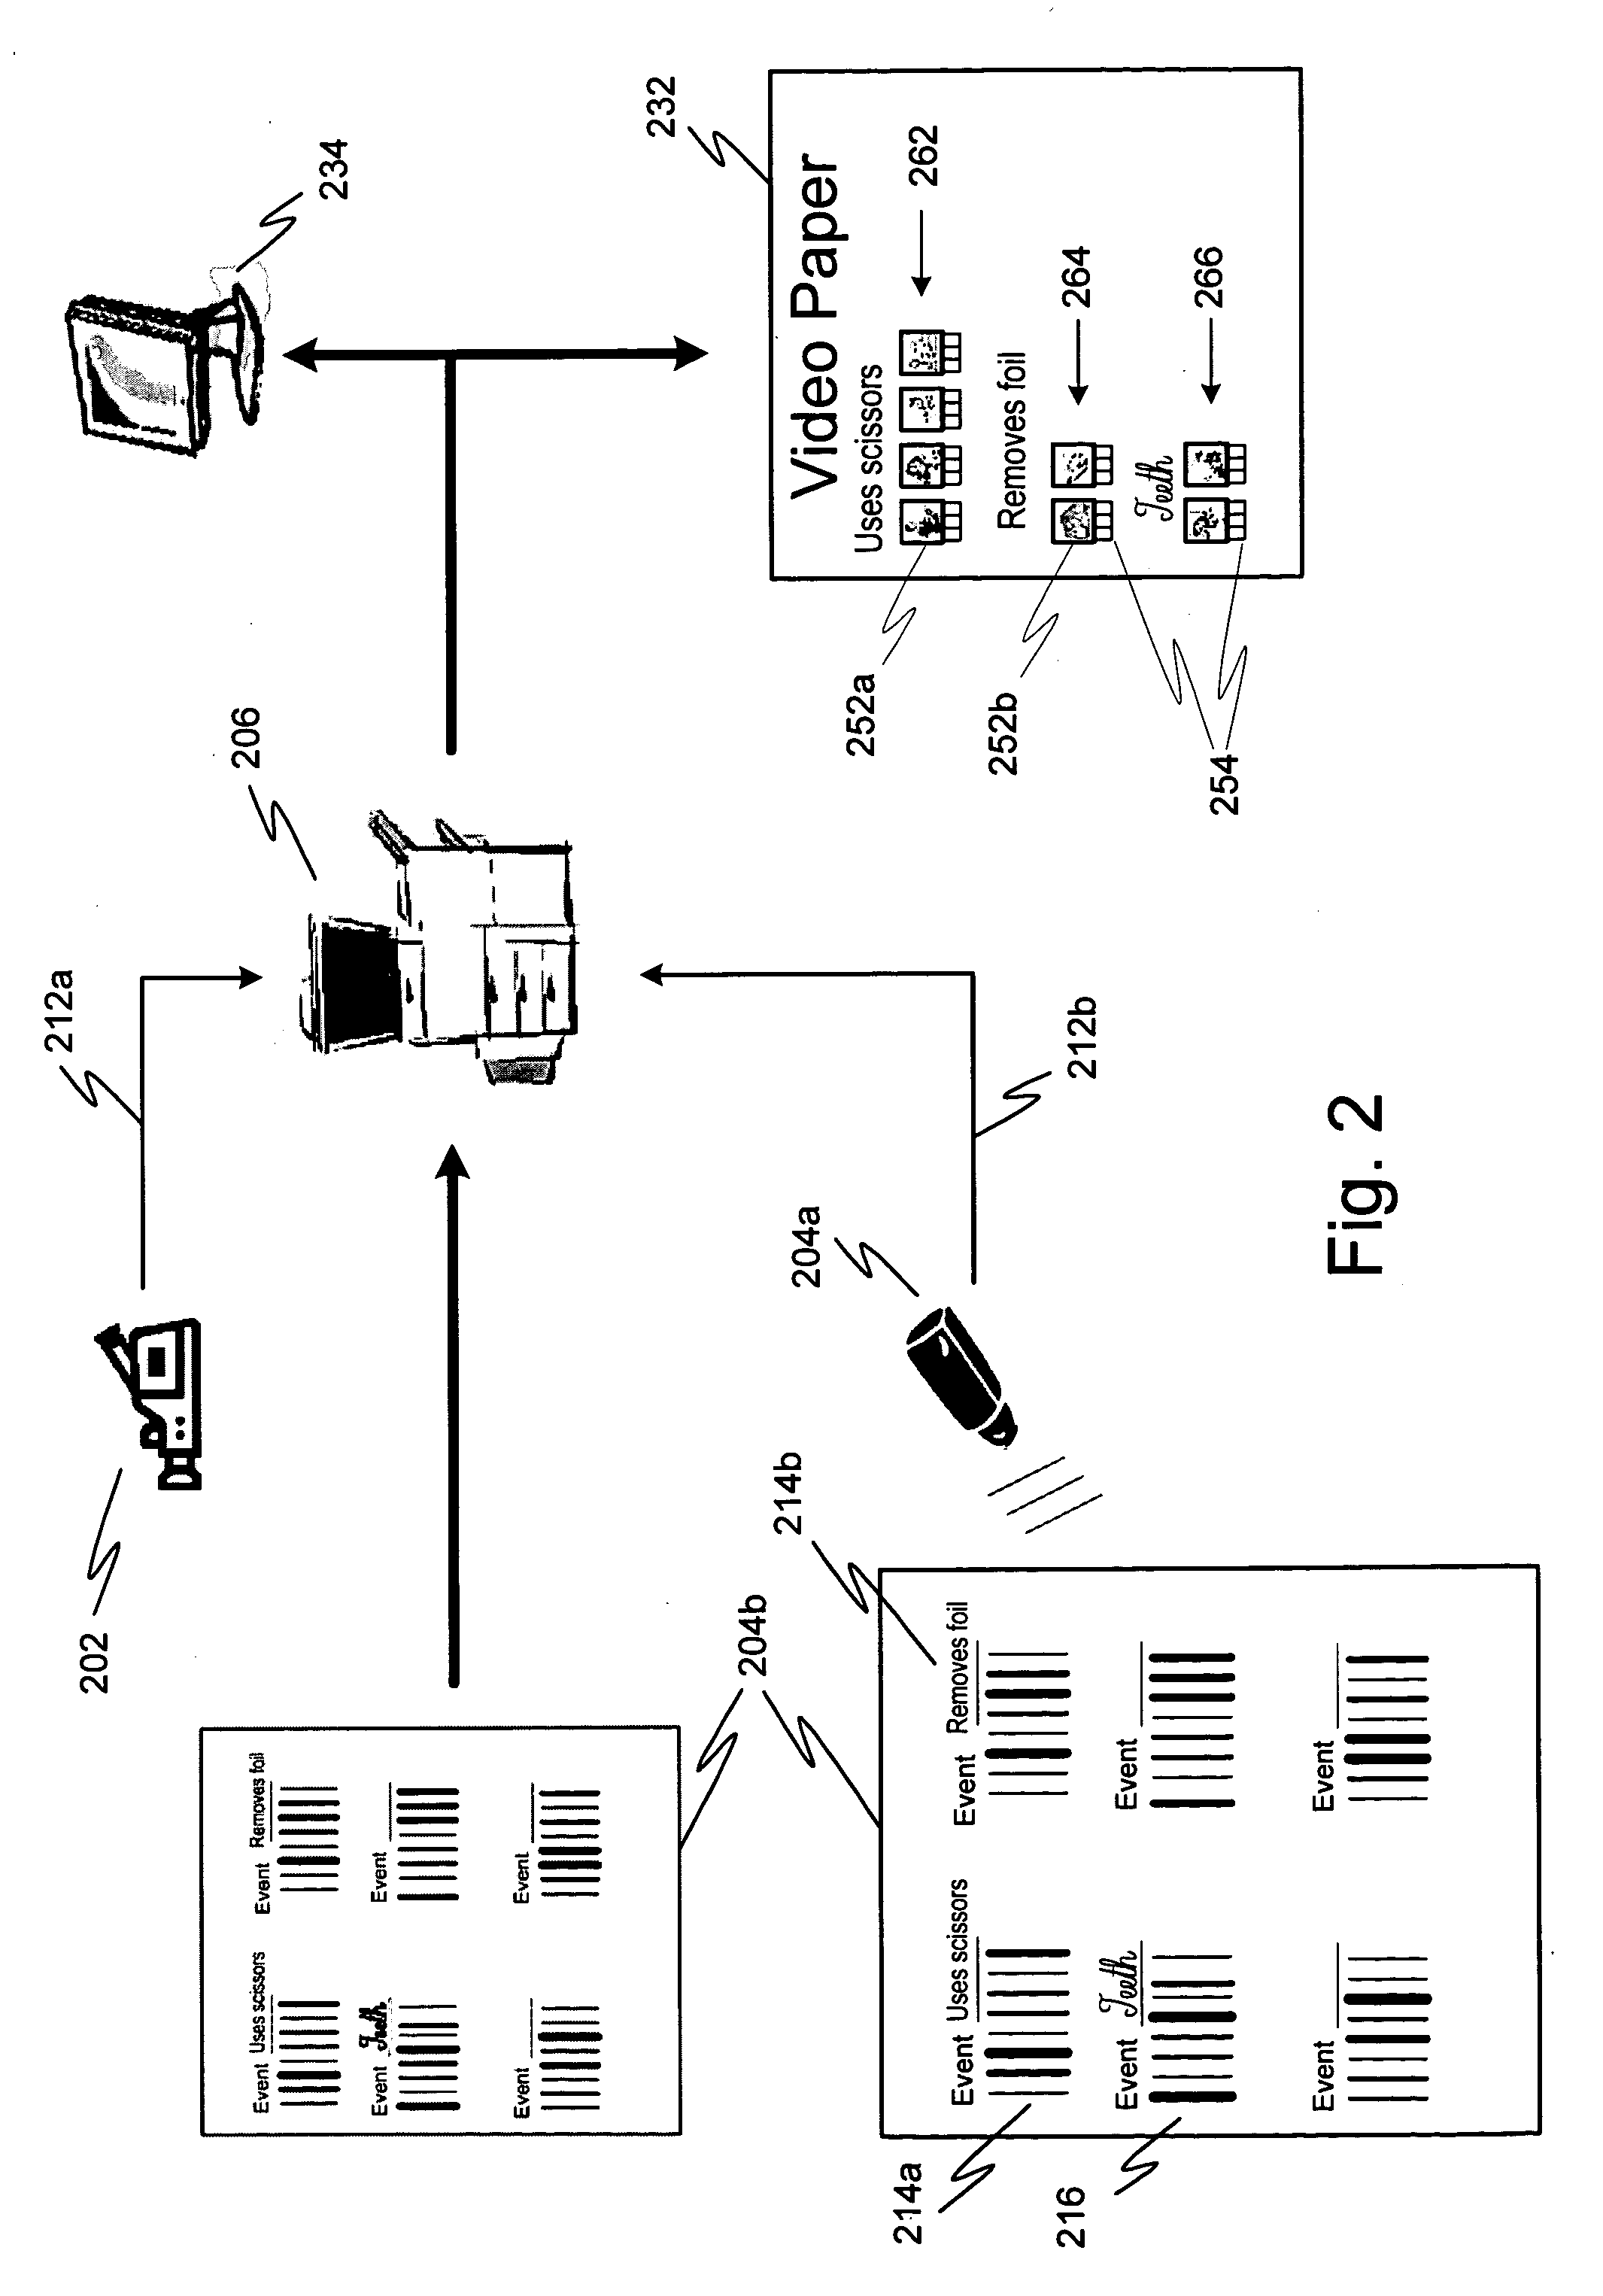 Transmission of event markers to data stream recorder